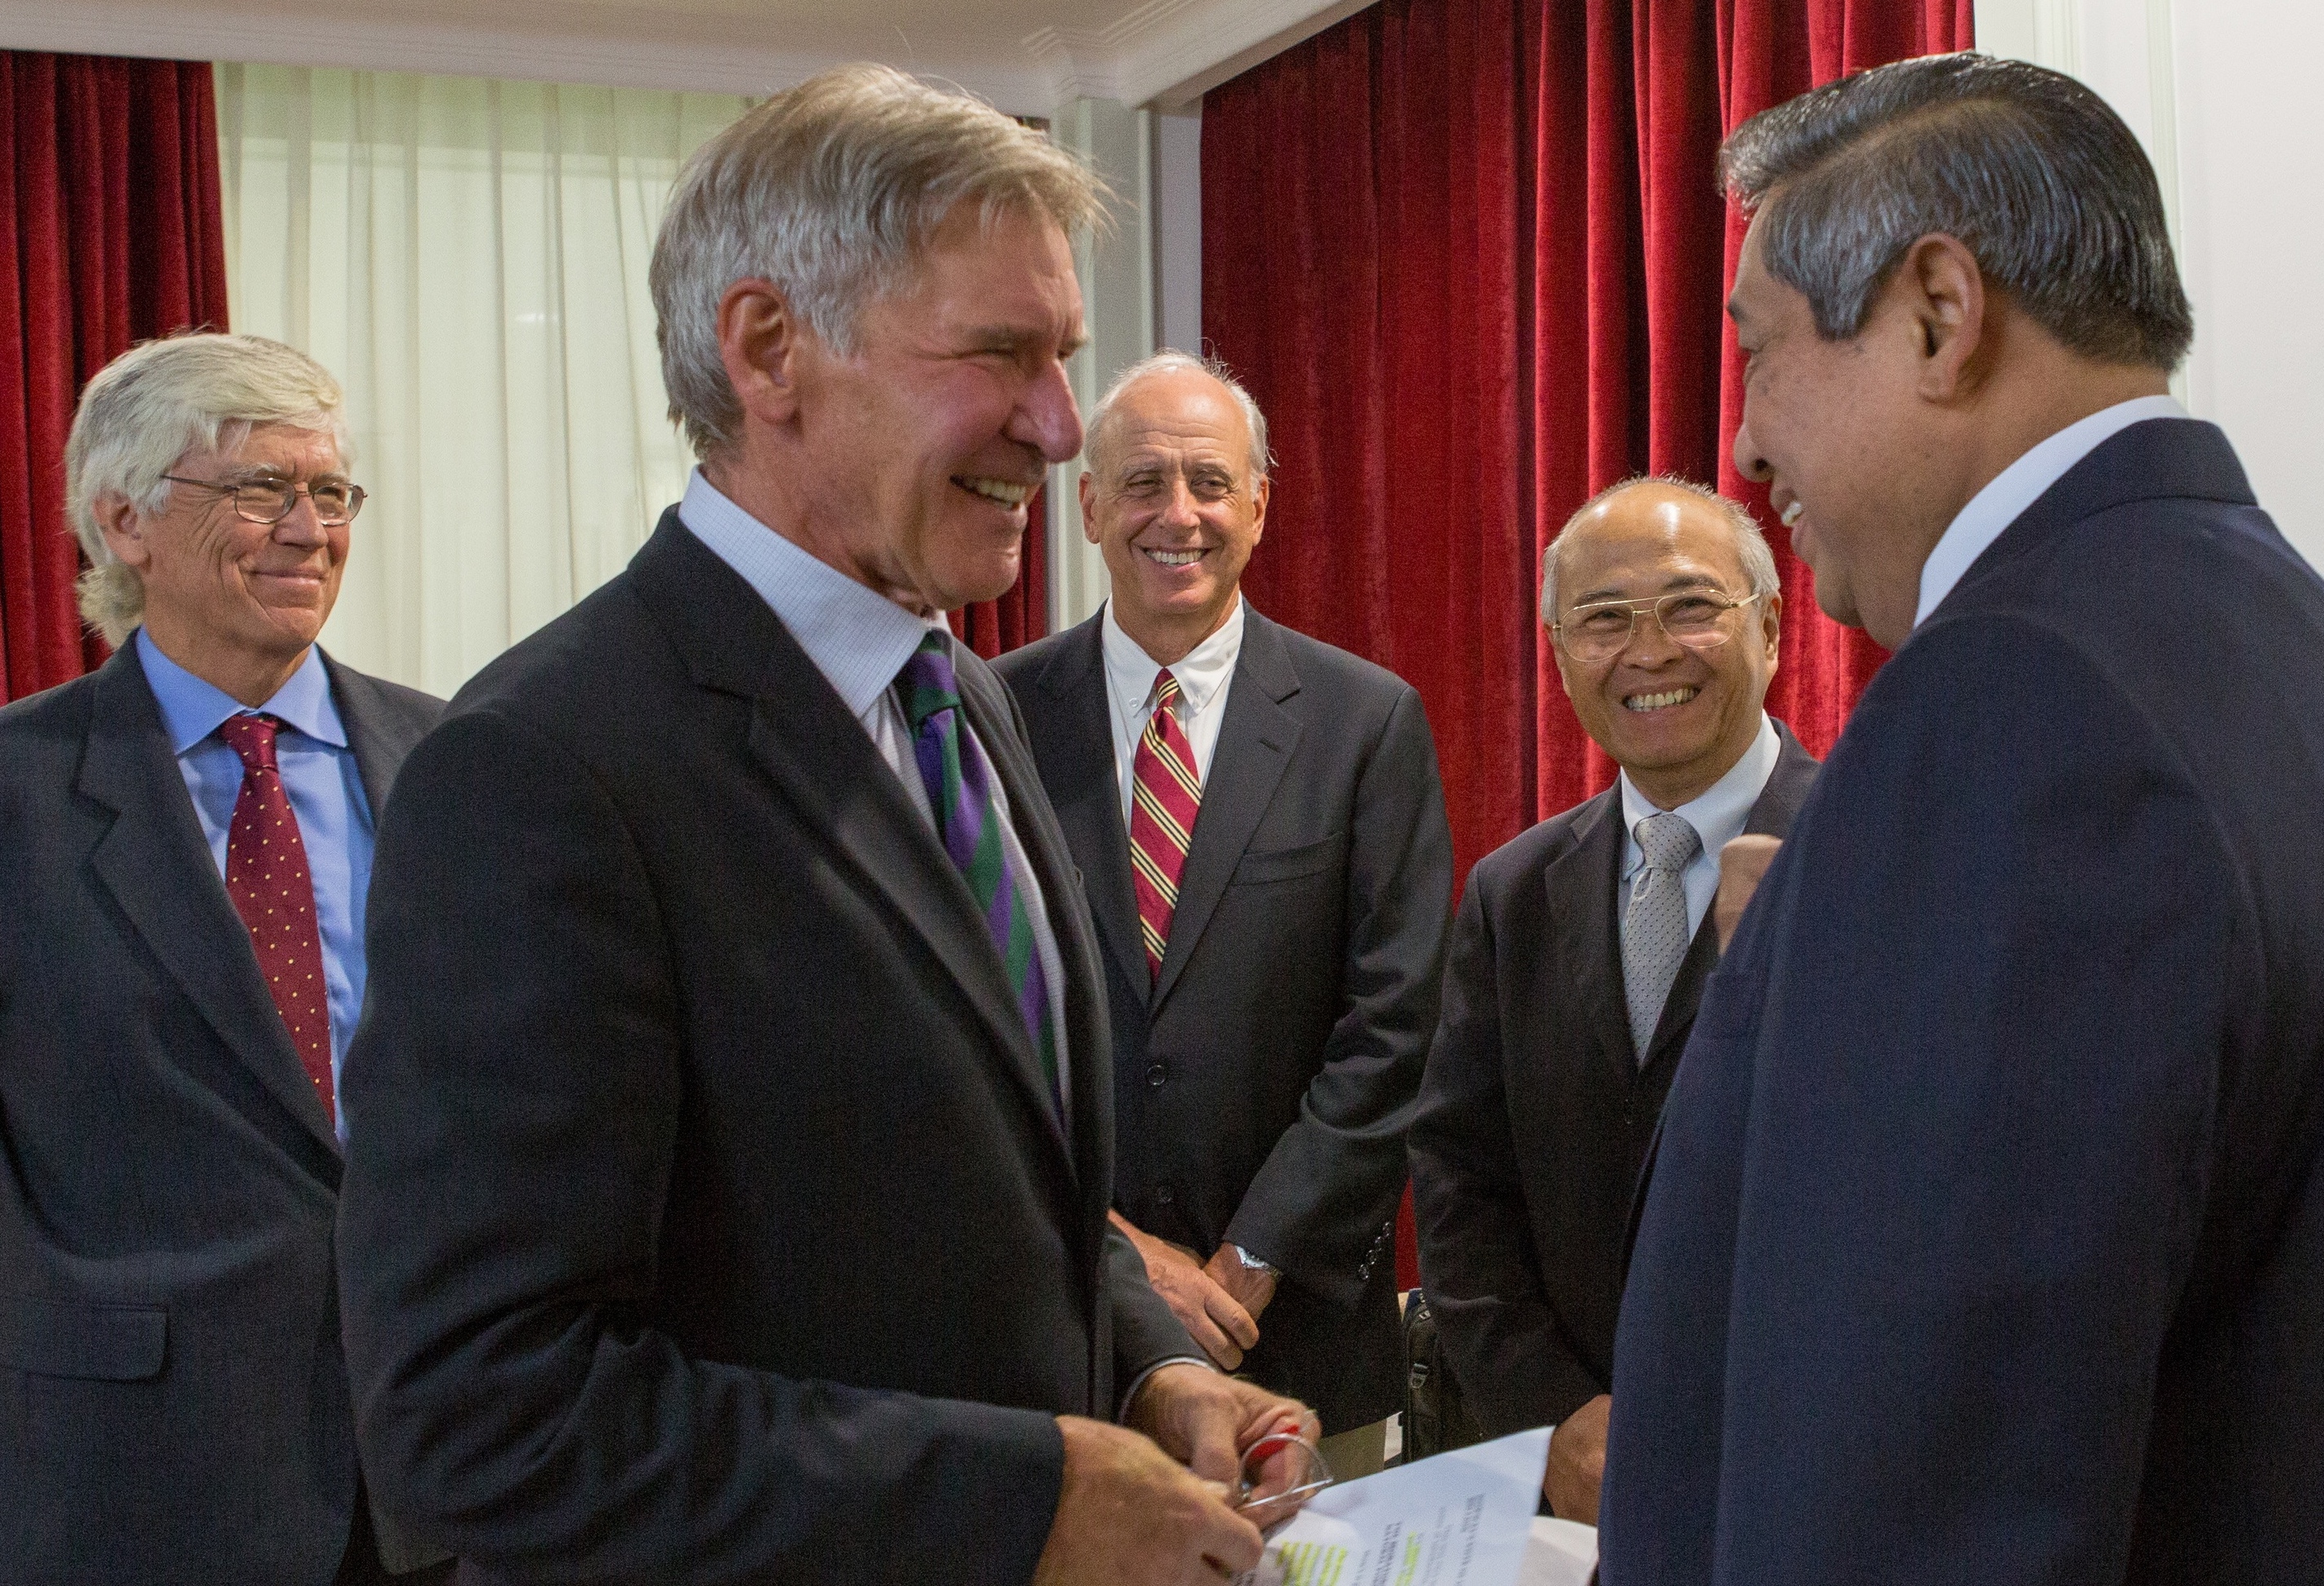 Interview with Harrison Ford and President Yudhoyono, along with Russ Mittermeier, President of Conservation International (far left), and Kuntoro Mangkusobroto, Head of the President's Unit on forestry conservation.